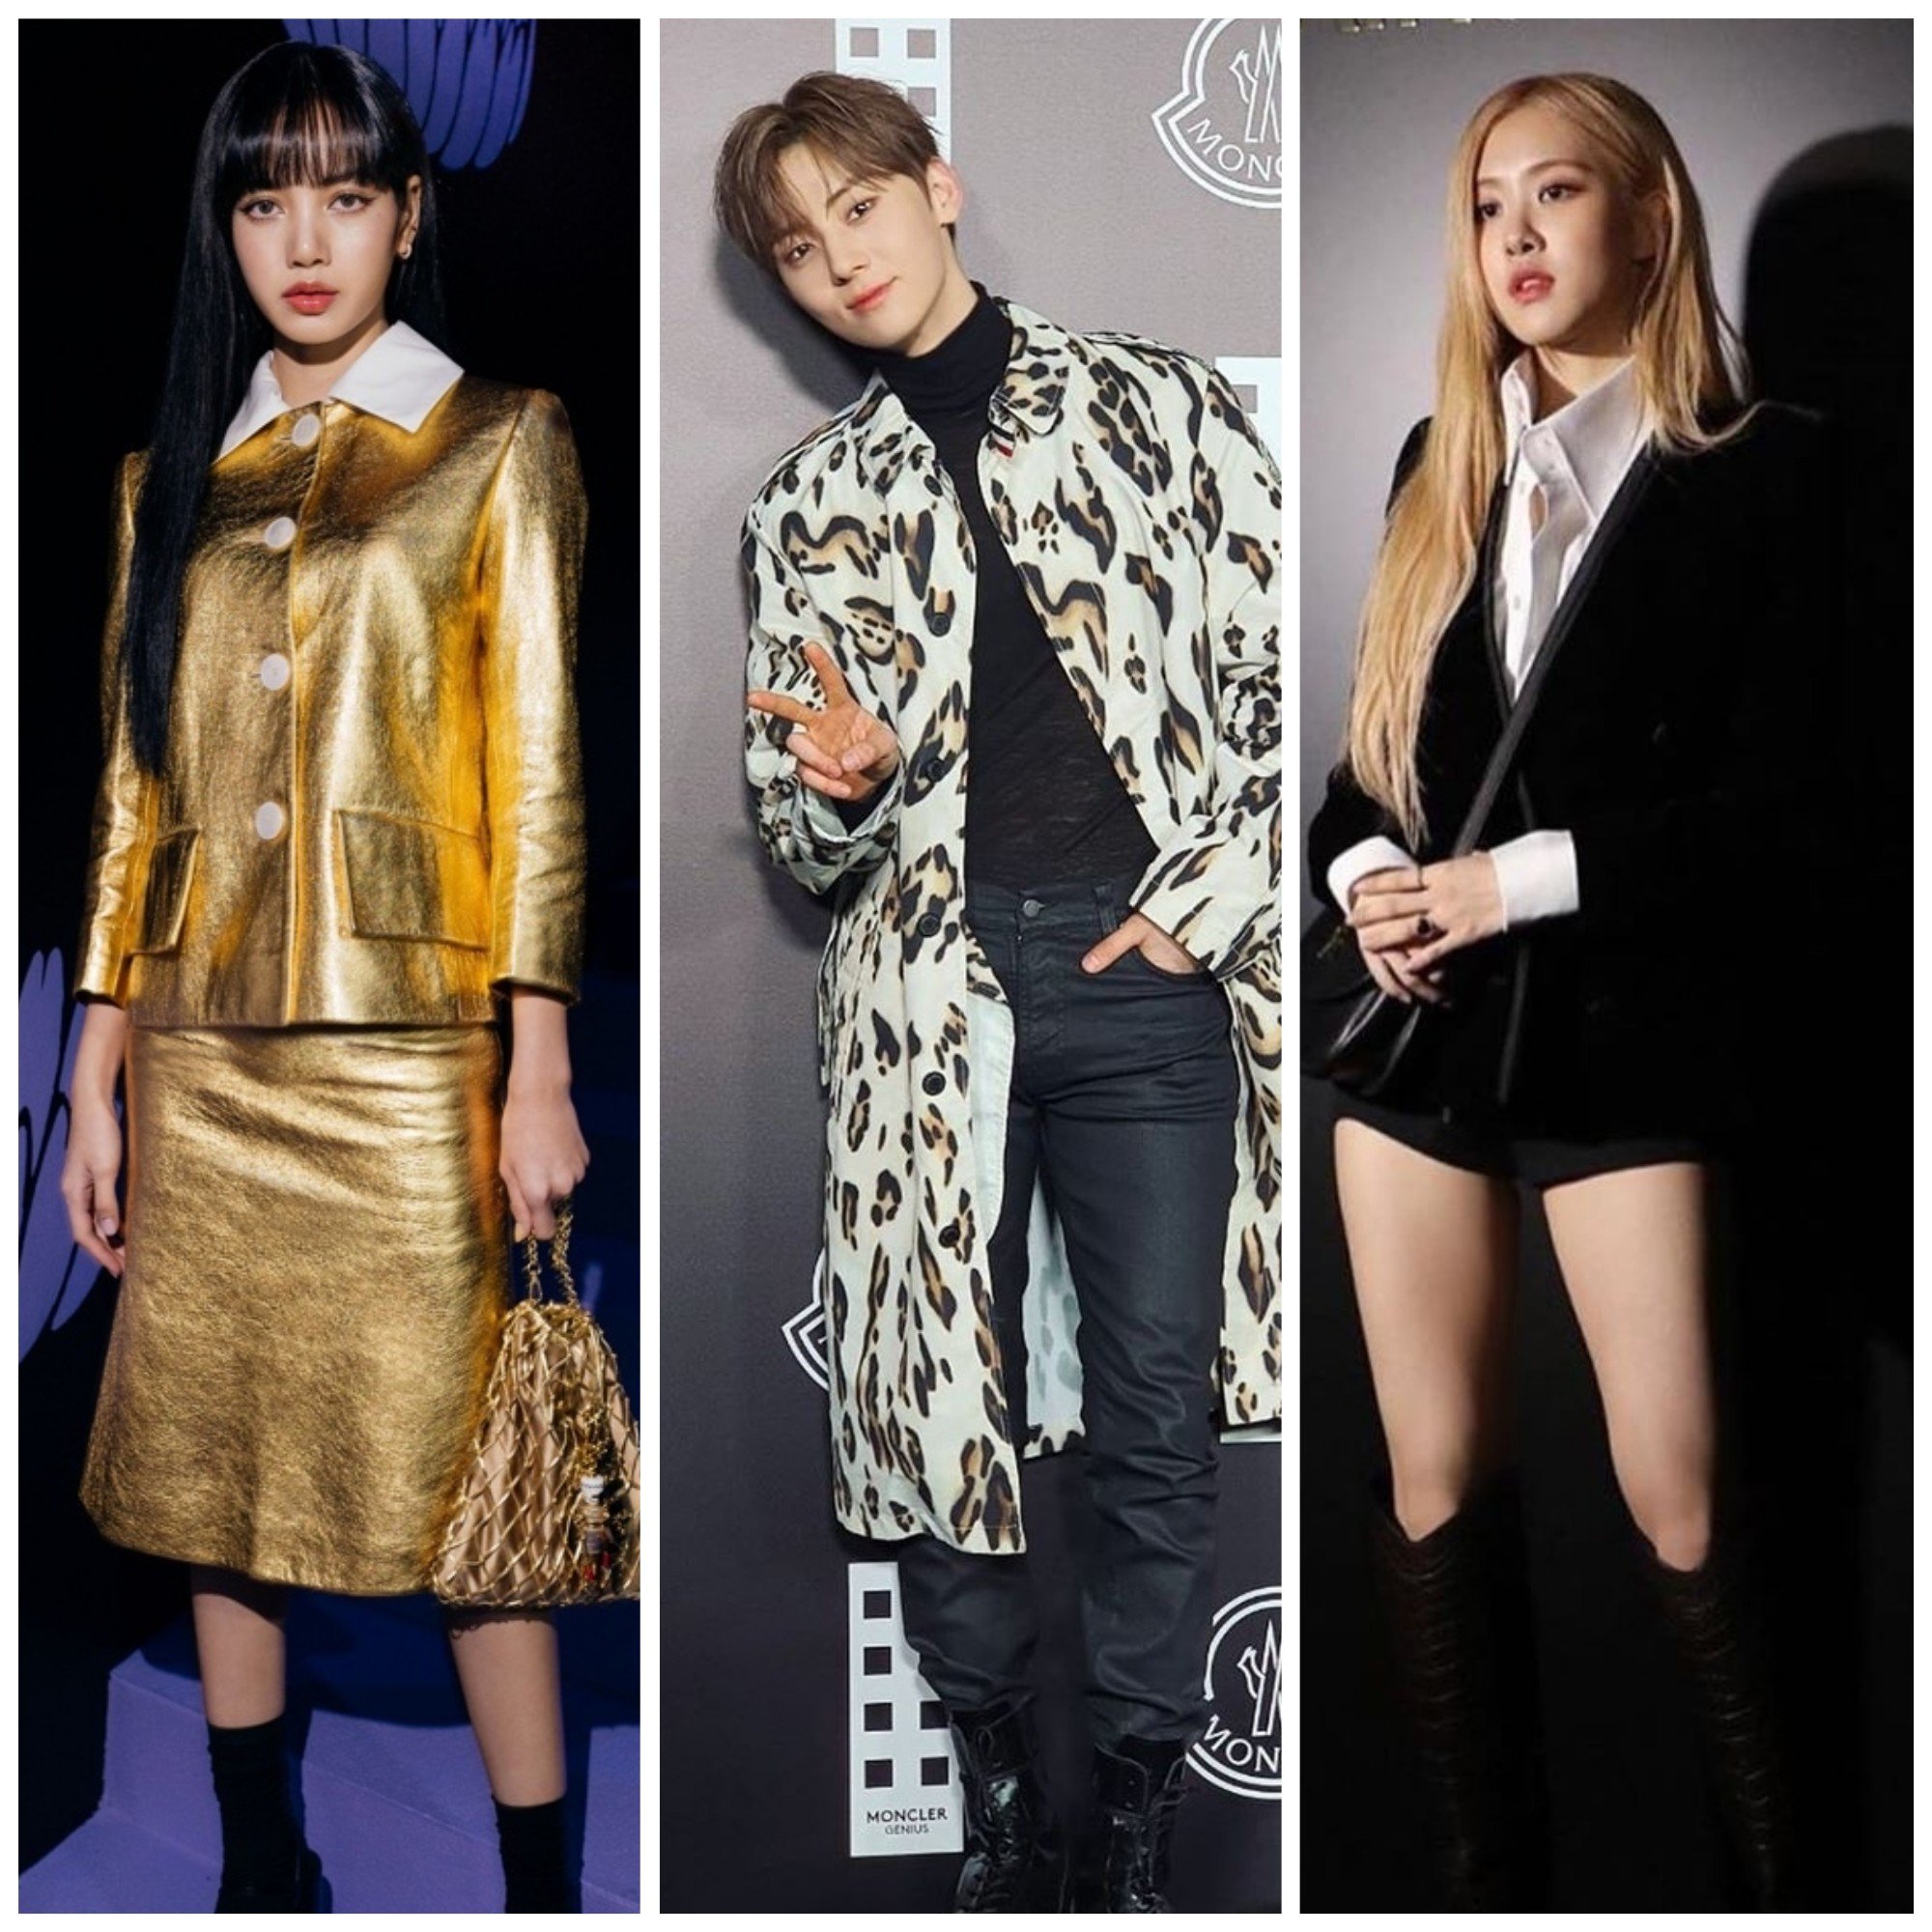 BlackPink’s Lisa, Minhyun from NU’EST and BlackPink’s Rosé were among the South Korean celebrities to claim centre stage at the major fashion weeks in New York, London, Milan and Paris. Photo: Instagram